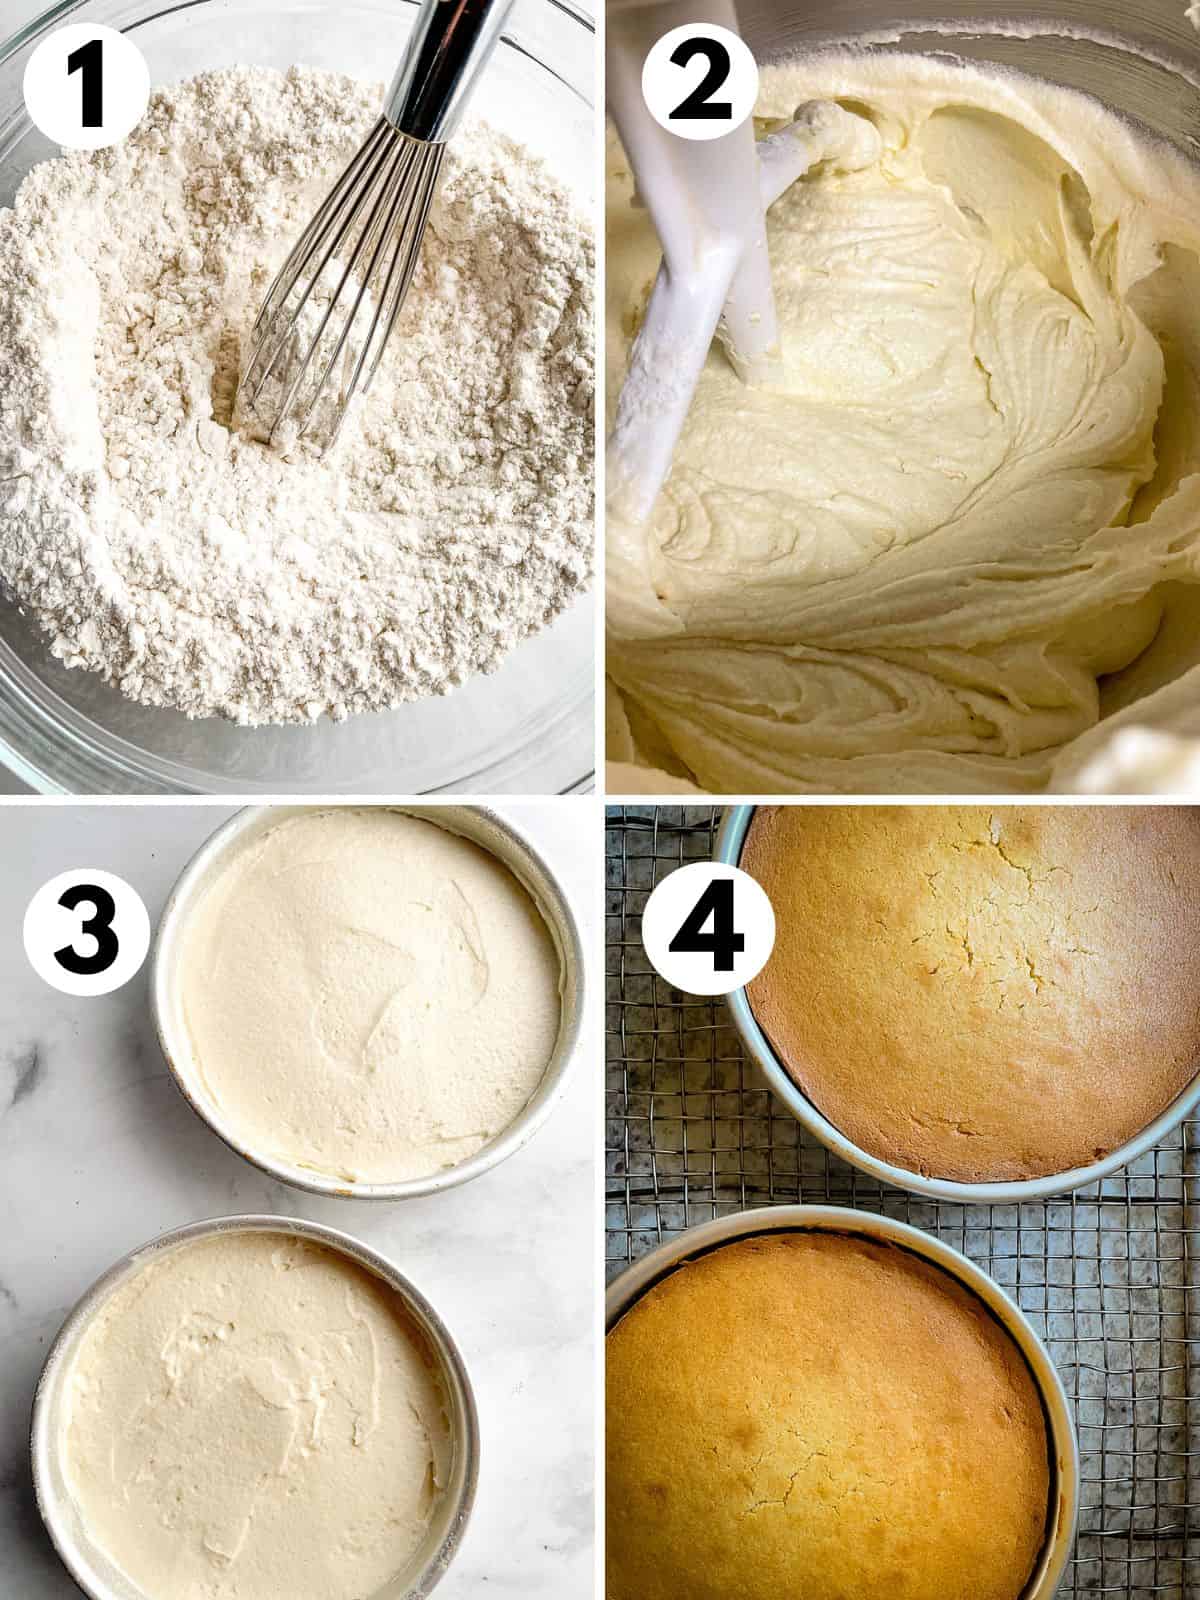 Steps for making gluten-free vanilla cake. 1. Whisking the gluten-free flour. 2. Making the batter. 3. Batter spread in cake pans. 4. Gluten-free vanilla cake baked in a pan.